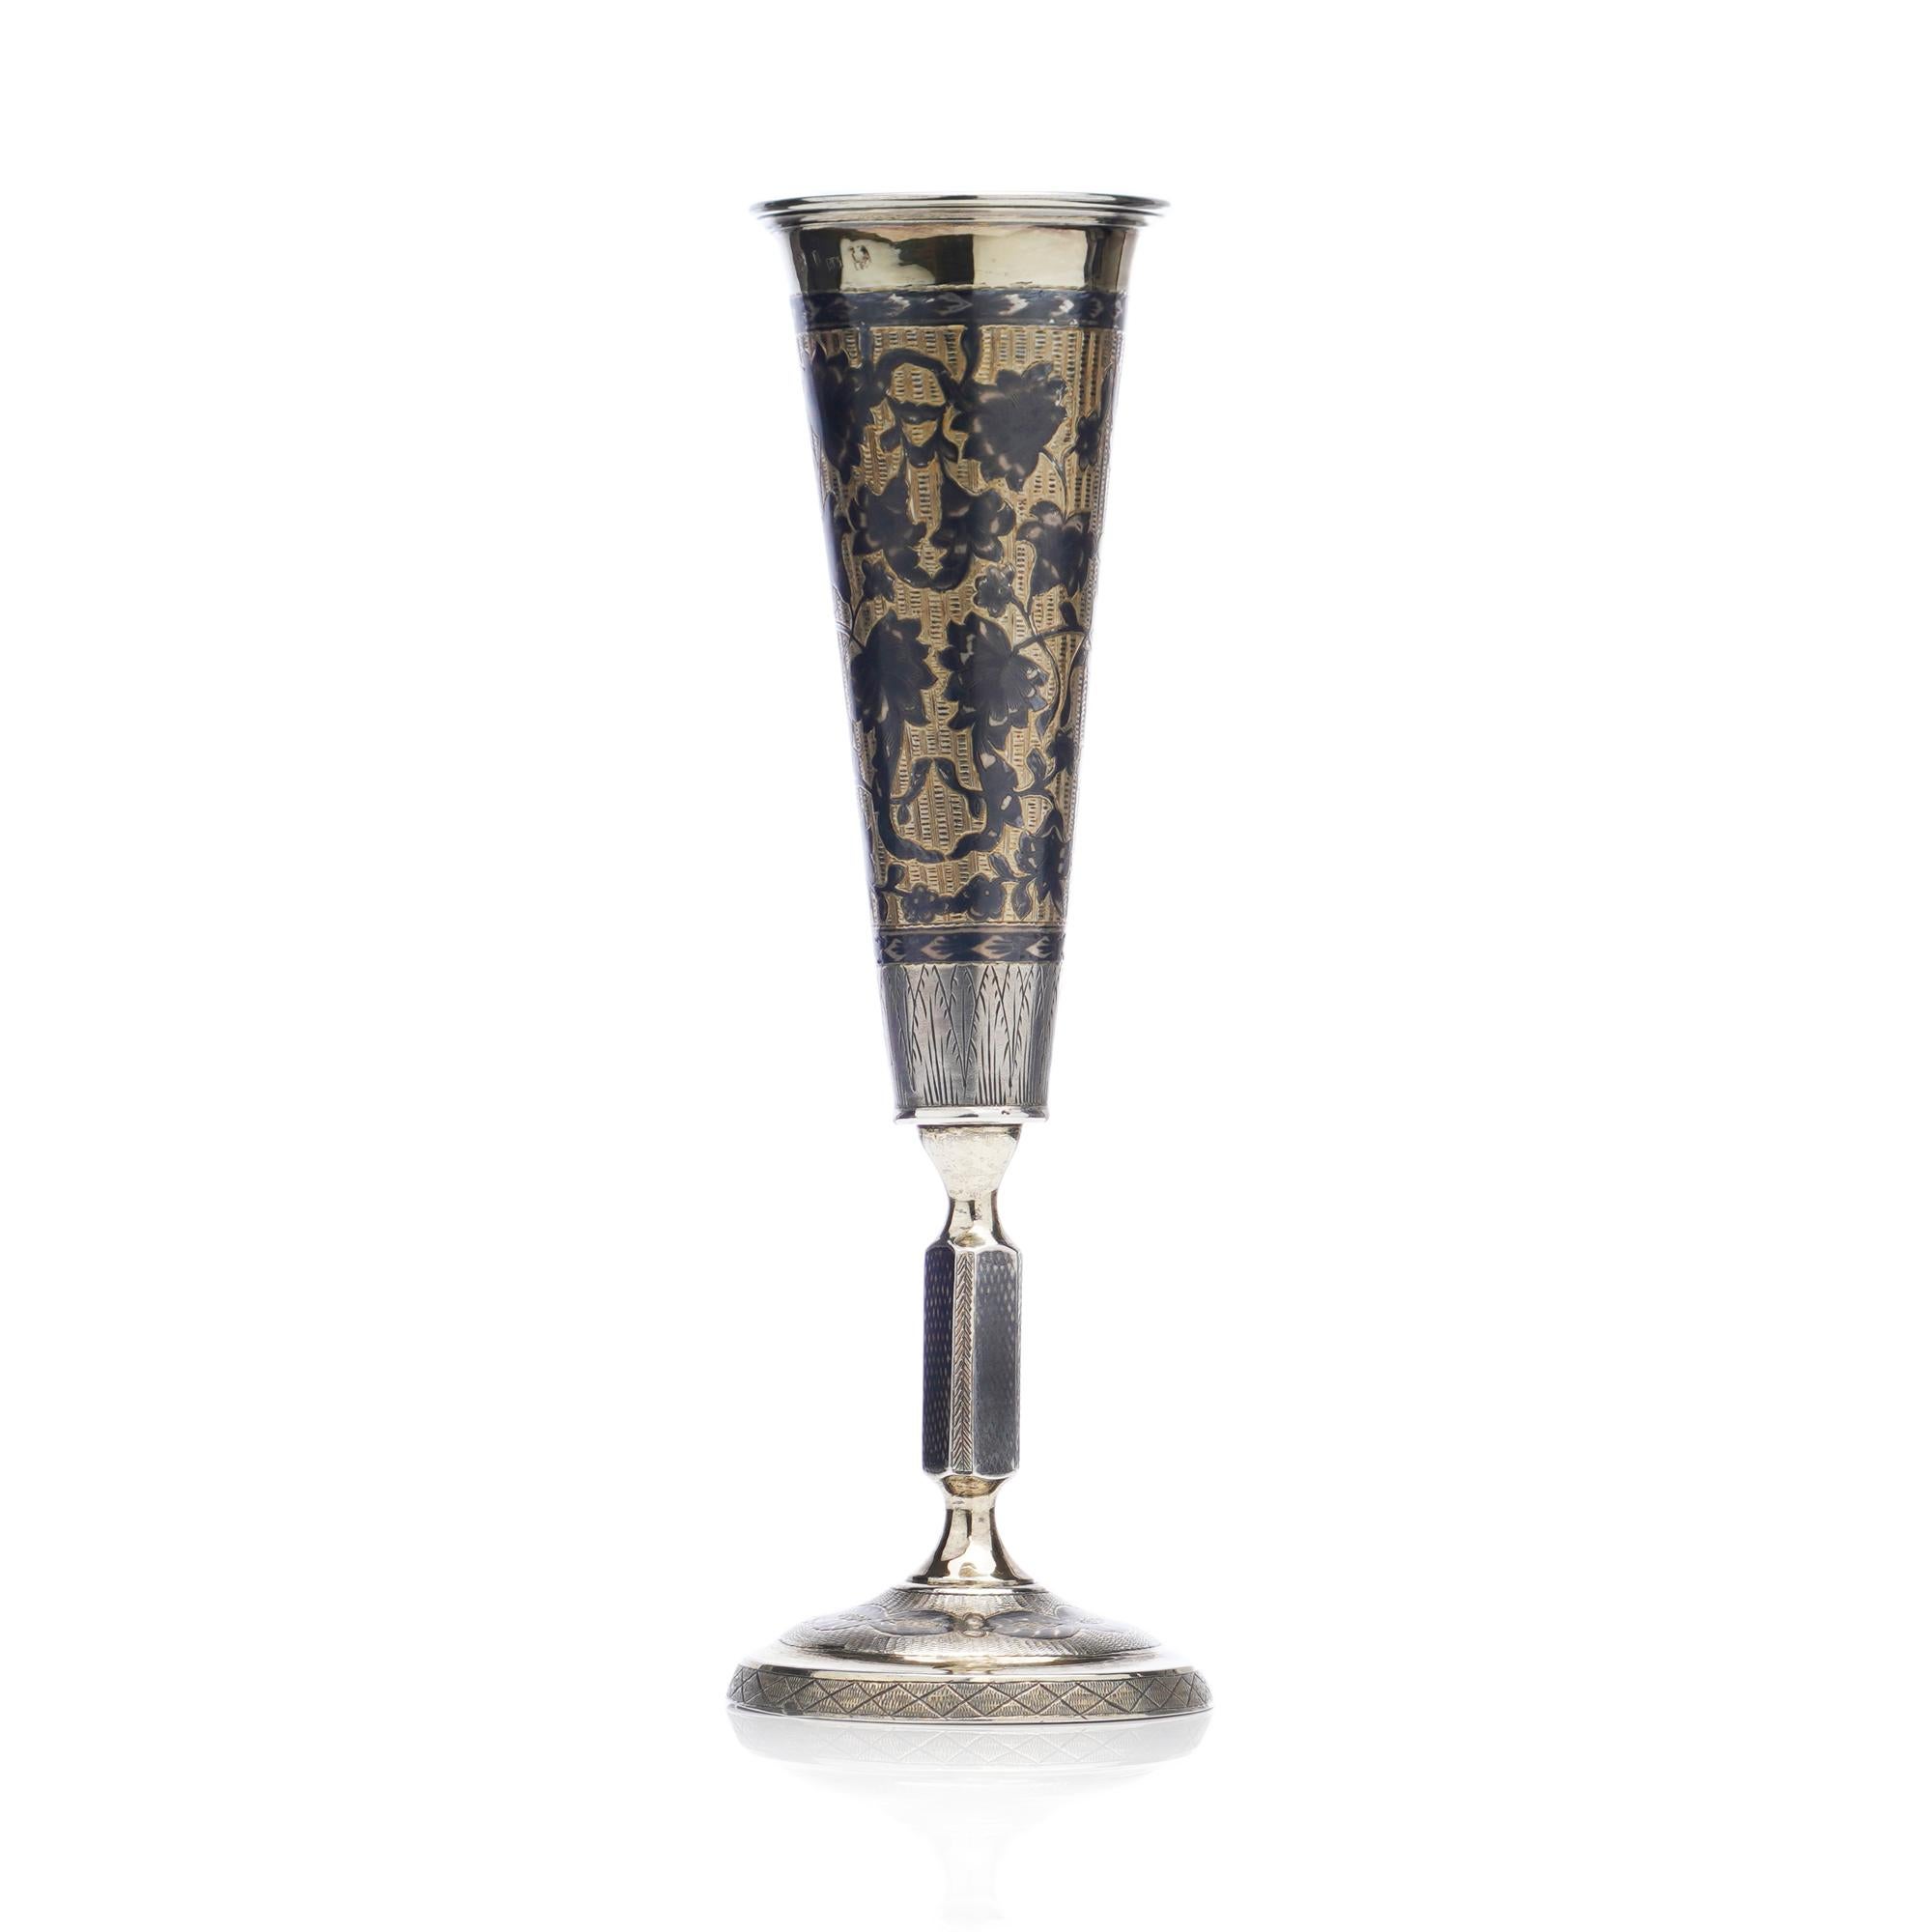 Antique 19th century 875.(84 Zolotniki) silver - gilt Niello Kiddush cup flute decorated with floral motifs. 
Made in Russia, 1836
Hallmarked with maker's mark EE and silver purity mark 84 a standard for 84) 
Fully hallmarked. 

Approx.